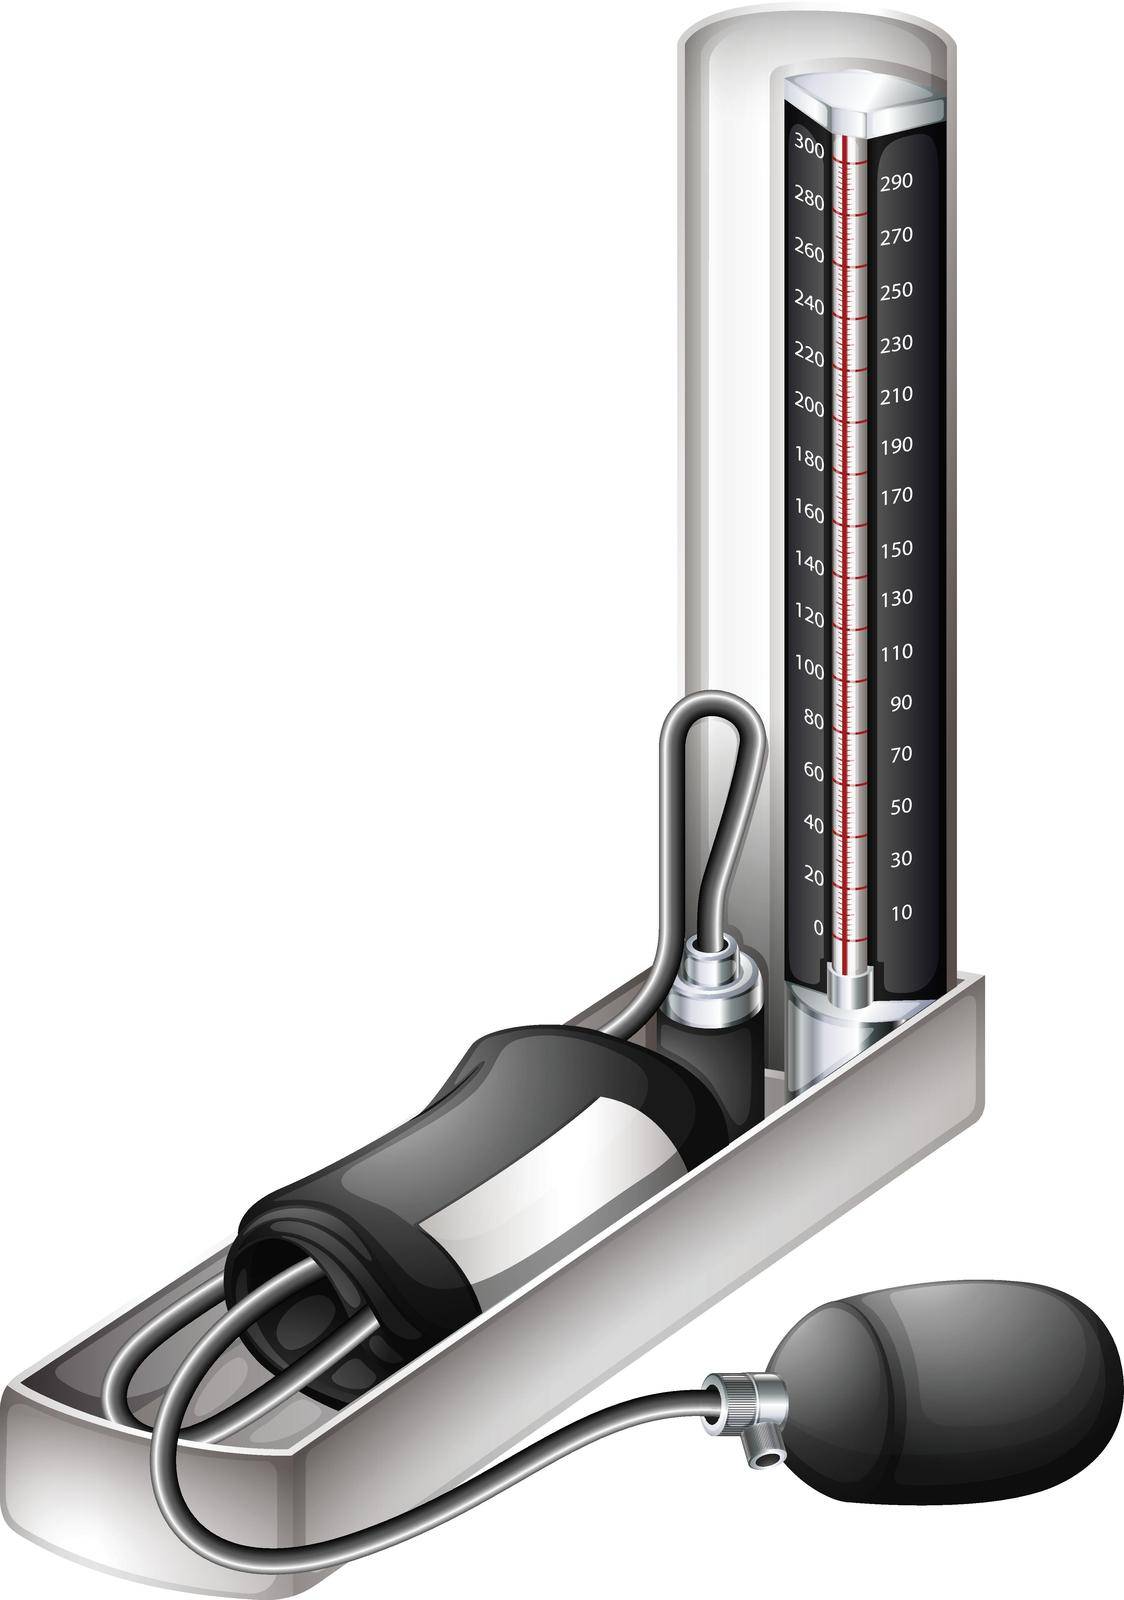 Illustration of a blood pressure measuring device on a white background